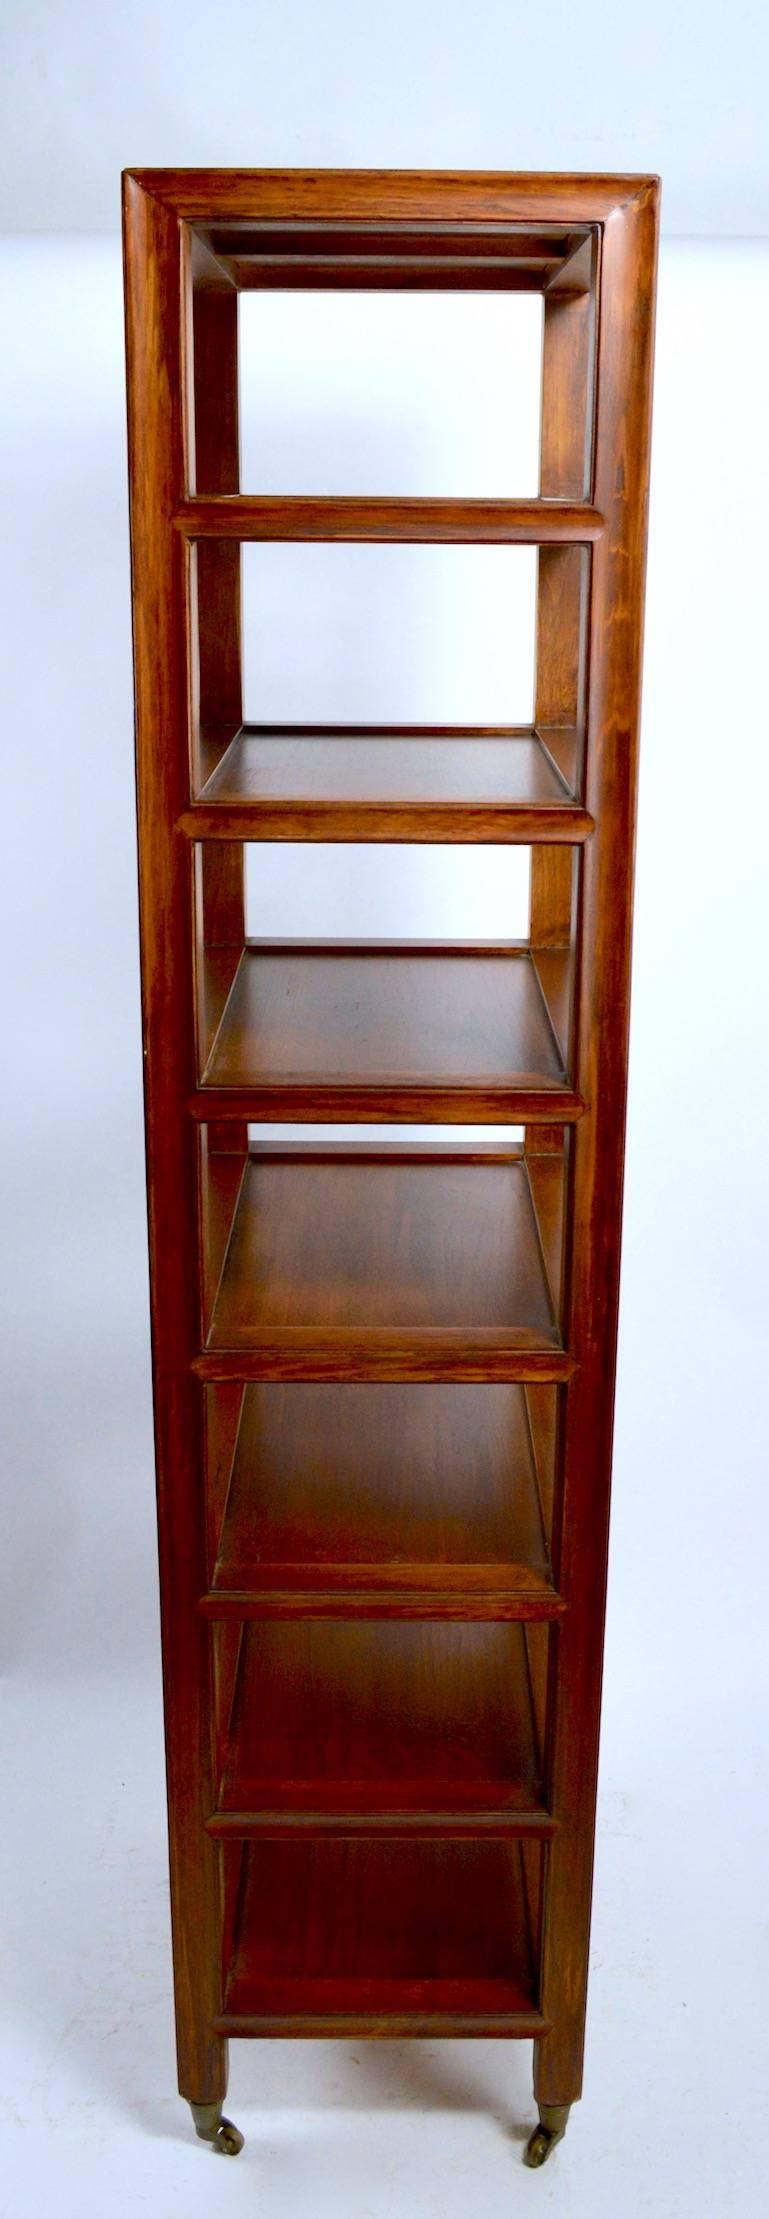 American Solid Wood Etagere on Brass Wheel Coasters